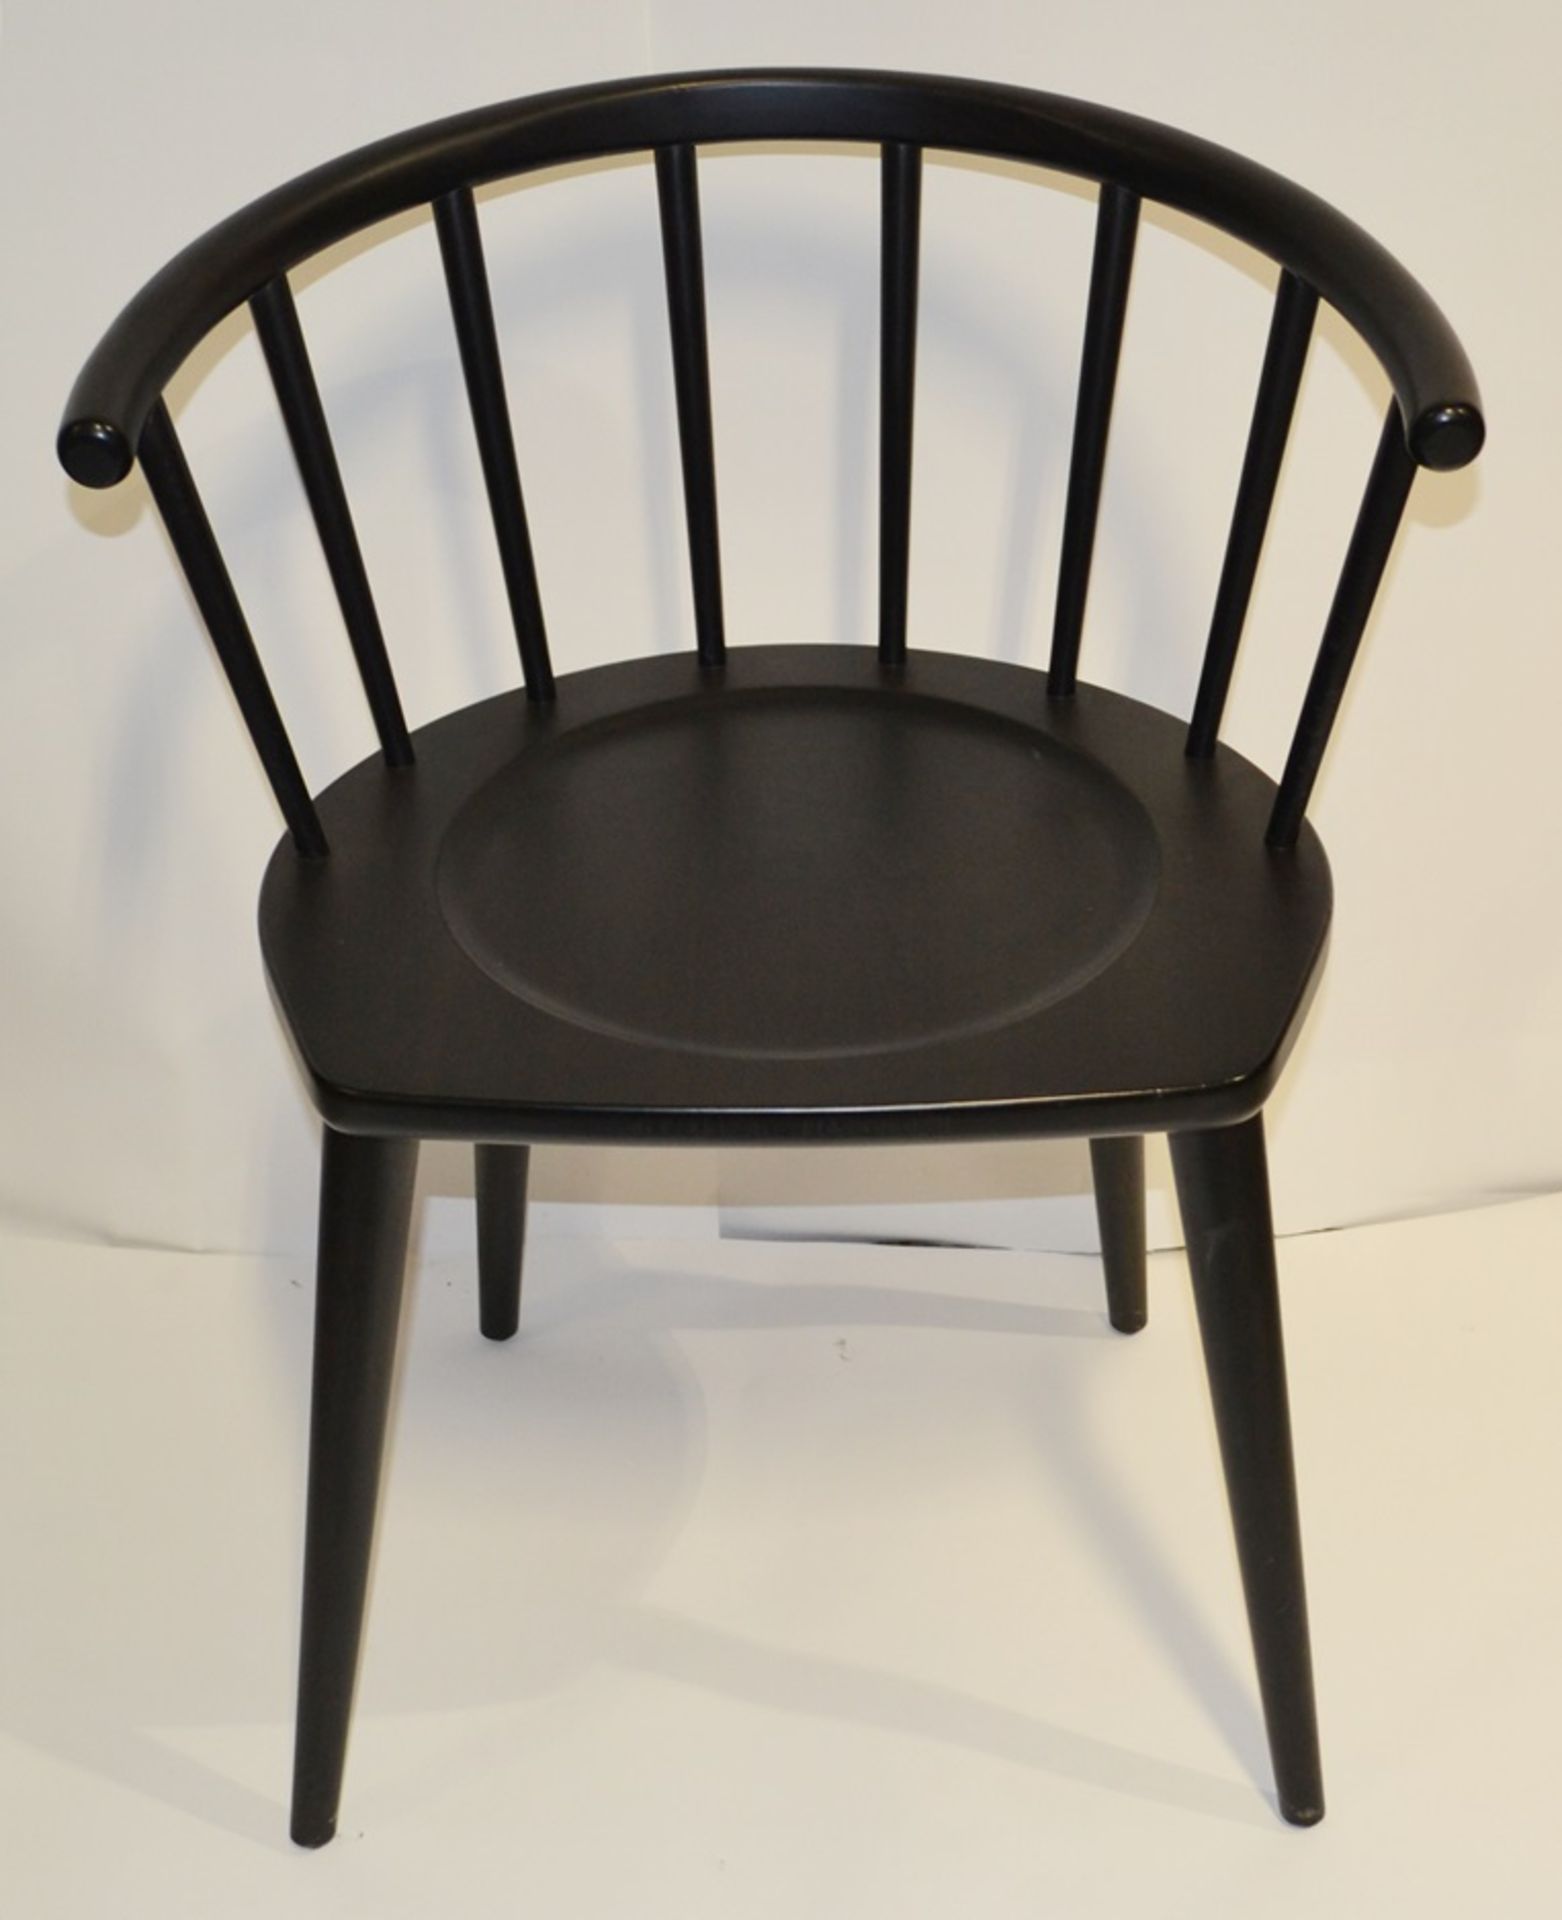 4 x Curved Spindleback Wooden Dining Chairs With Shaped Seats and Dark Finish - Dimensions: H73 x - Image 2 of 2